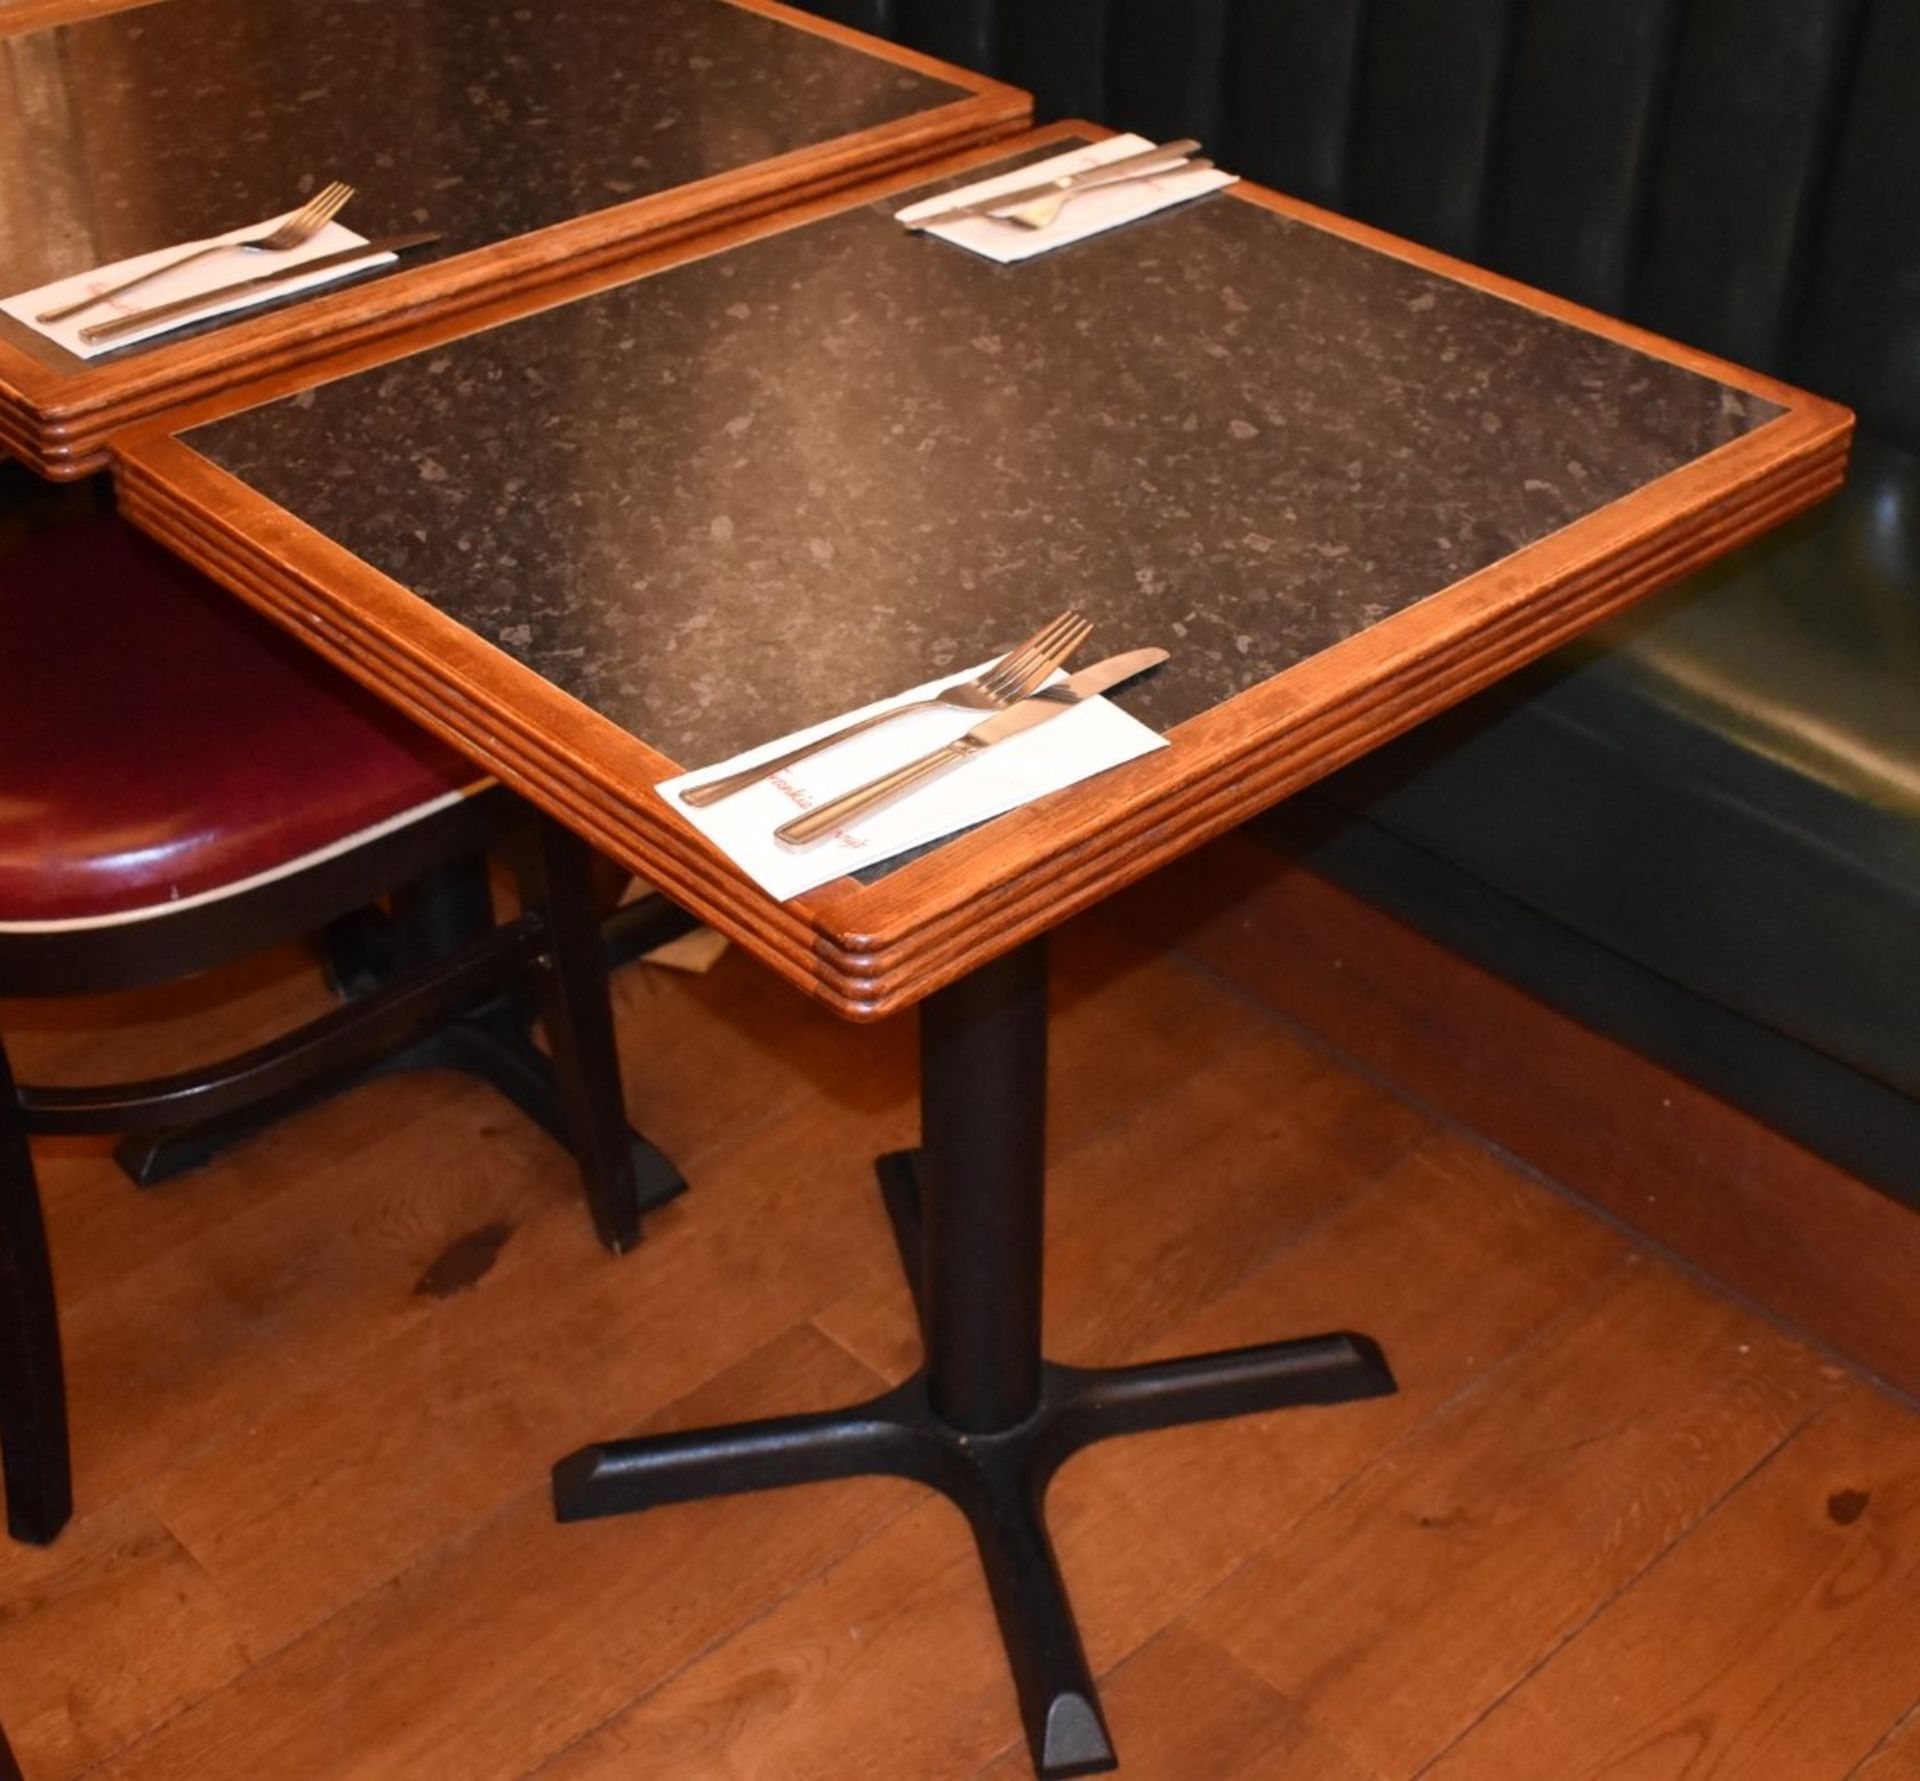 4 x Restaurant Bistro Tables With Granite Effect Tops and Cast Iron Bases - From American Italian - Image 3 of 7